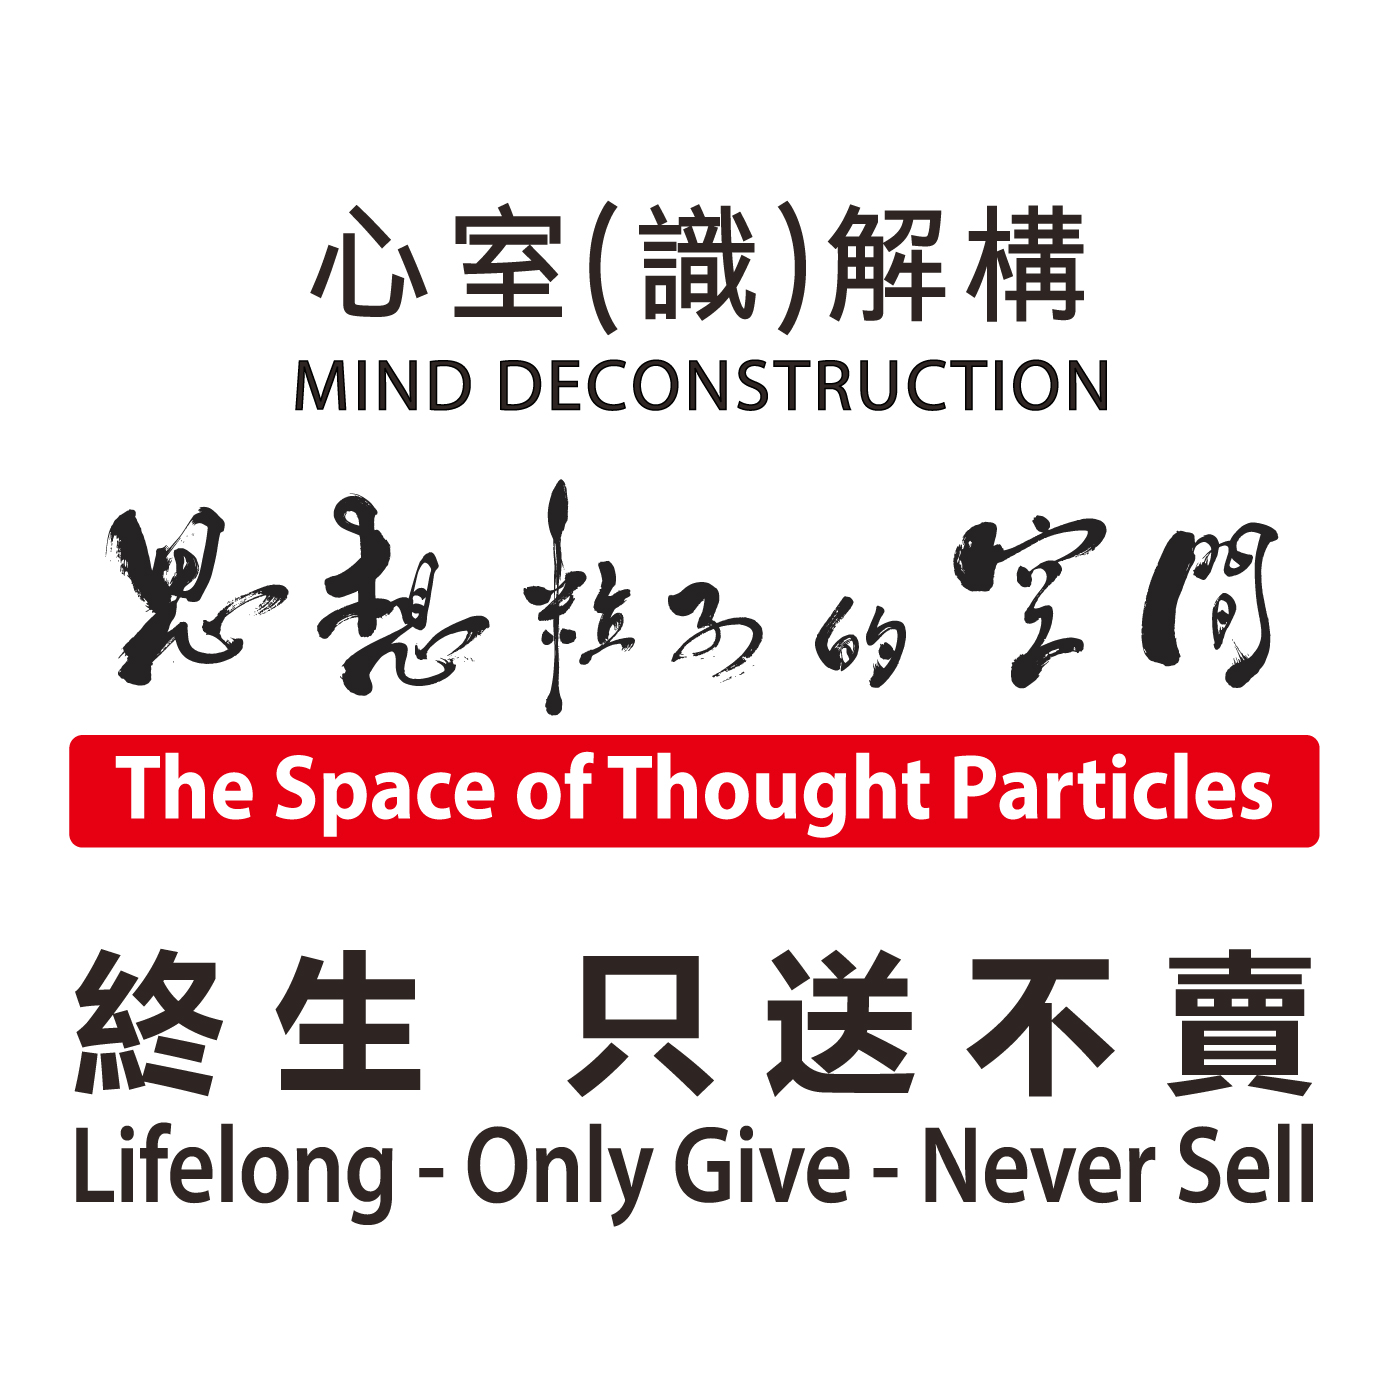 Mind Deconstruction | The Space of Thought Particles | Lifelong - Only Give - Never Sell | Act of Giving